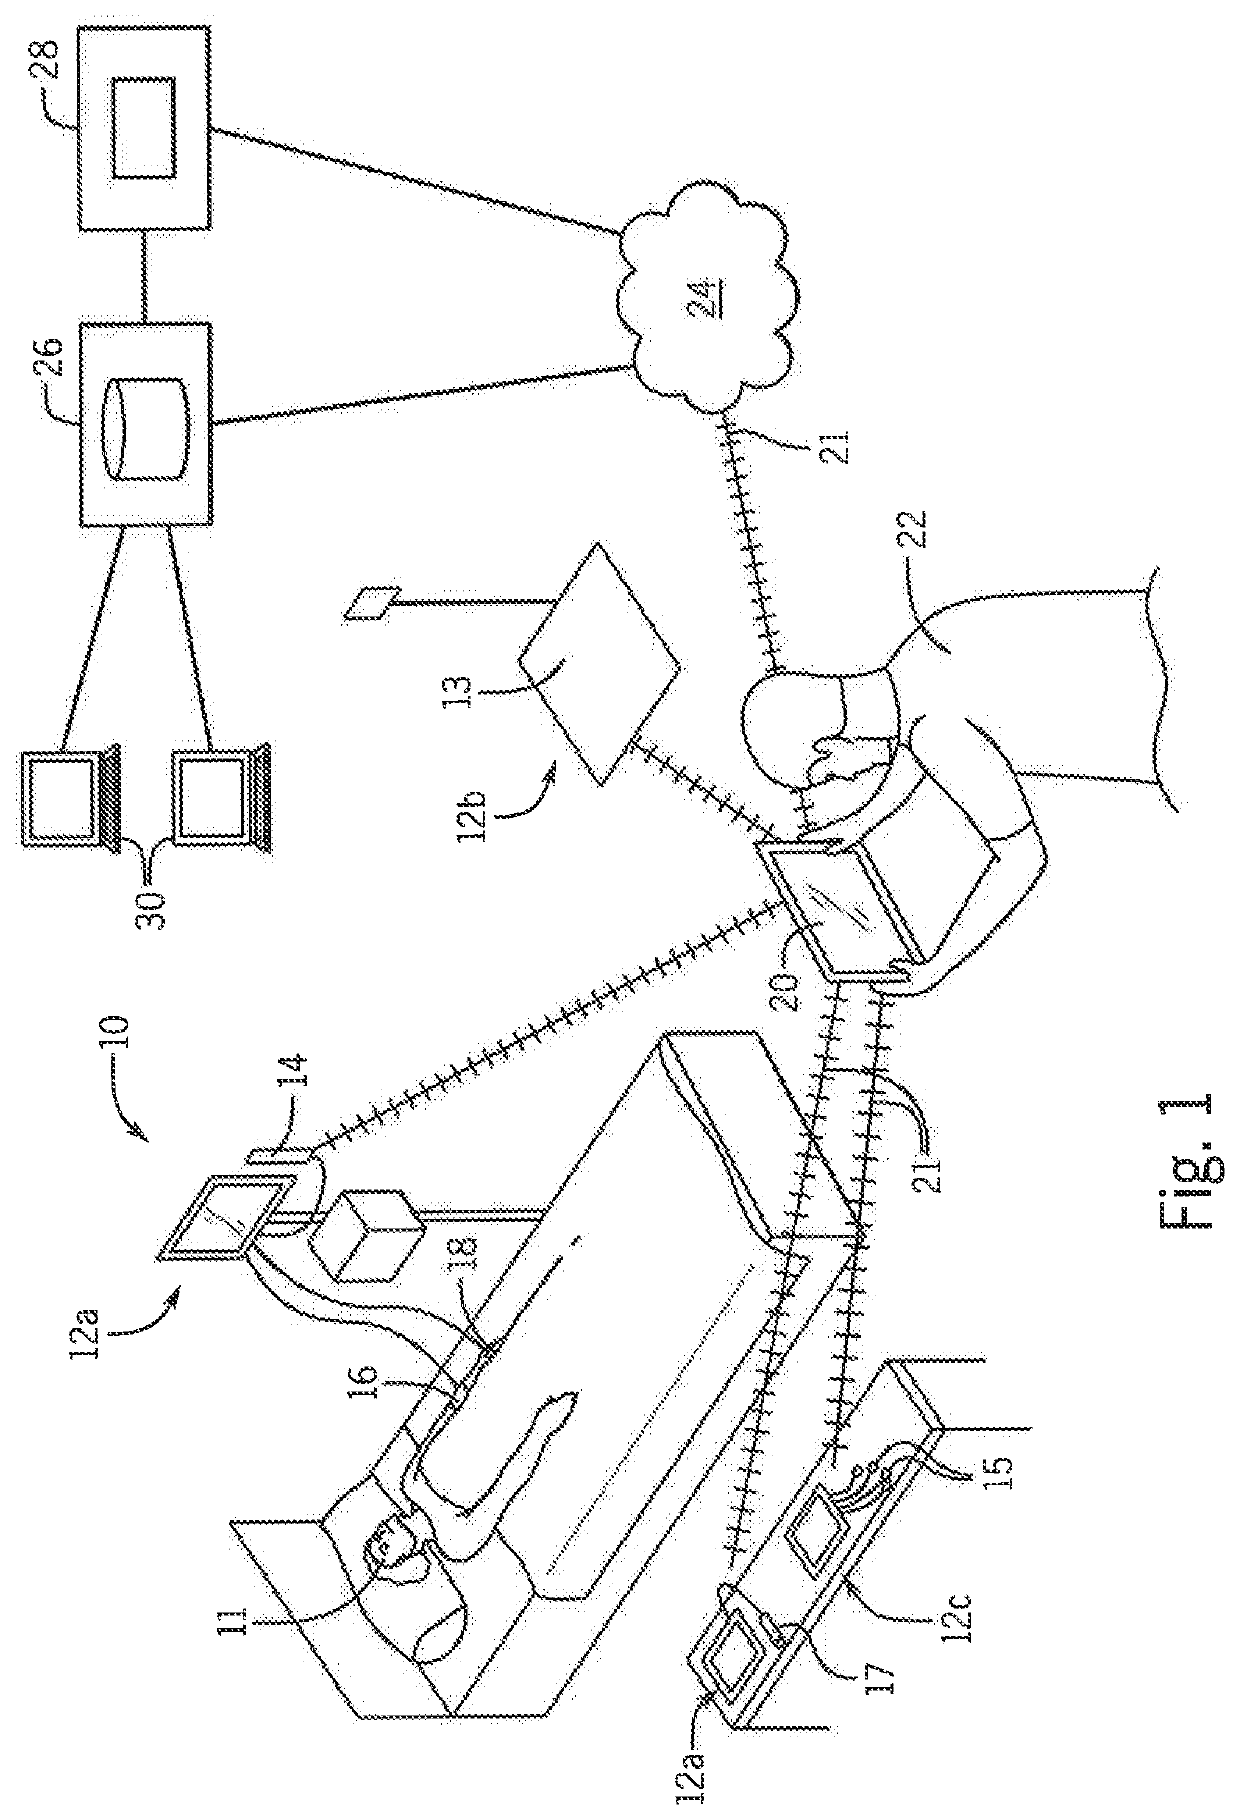 Apparatus for Clinical Data Capture